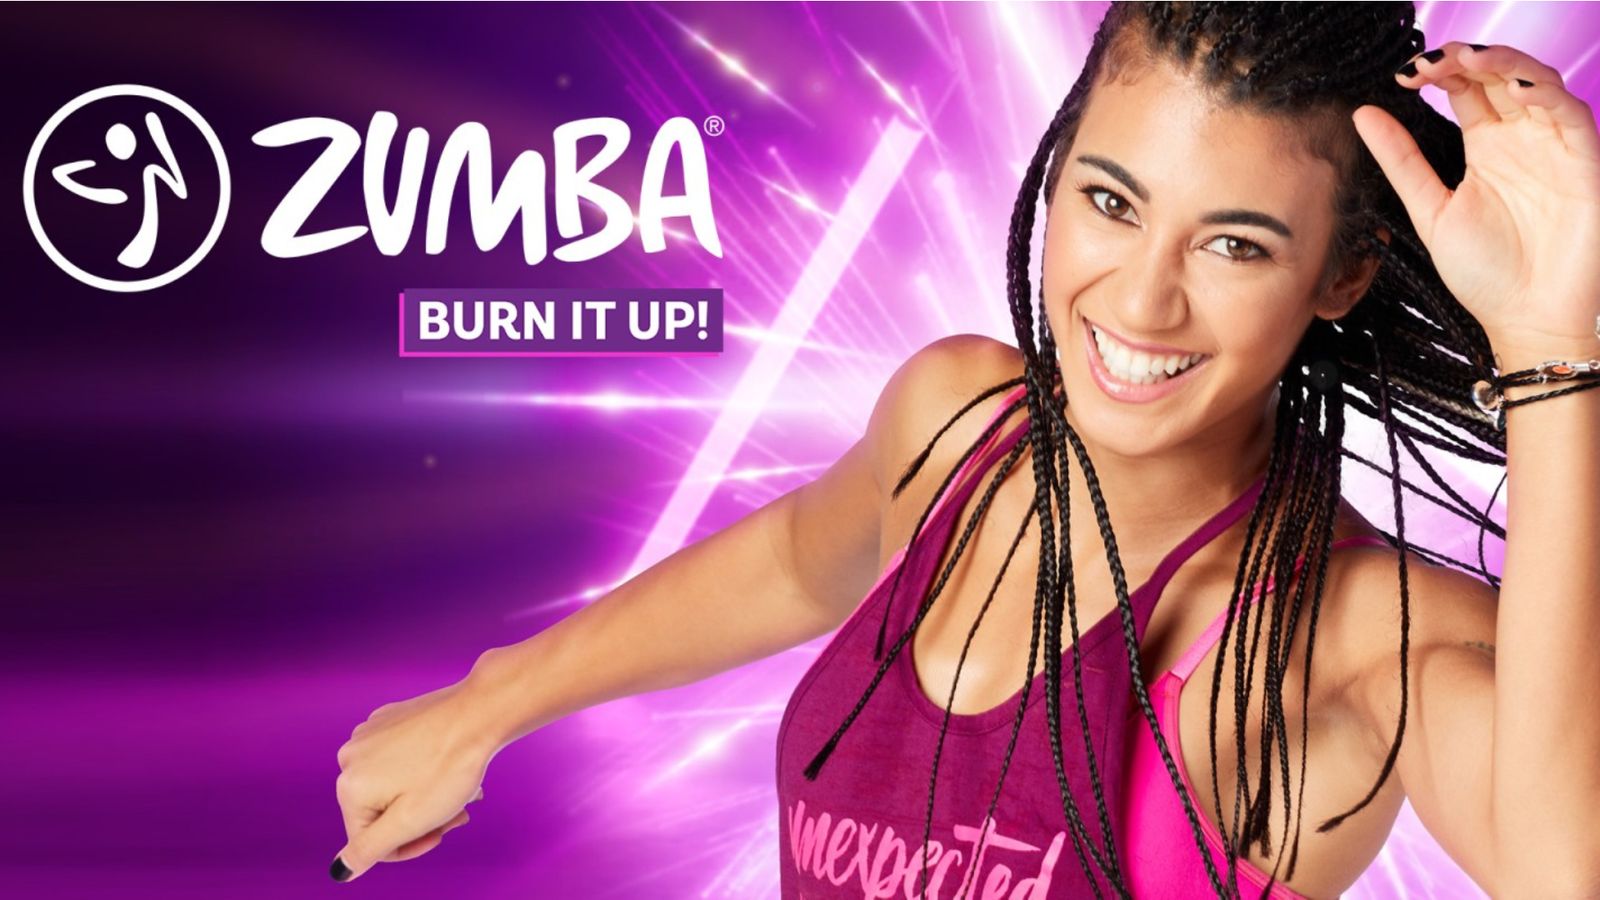 Zumba Burn It Up! case image for Switch featuring a woman in a pink top